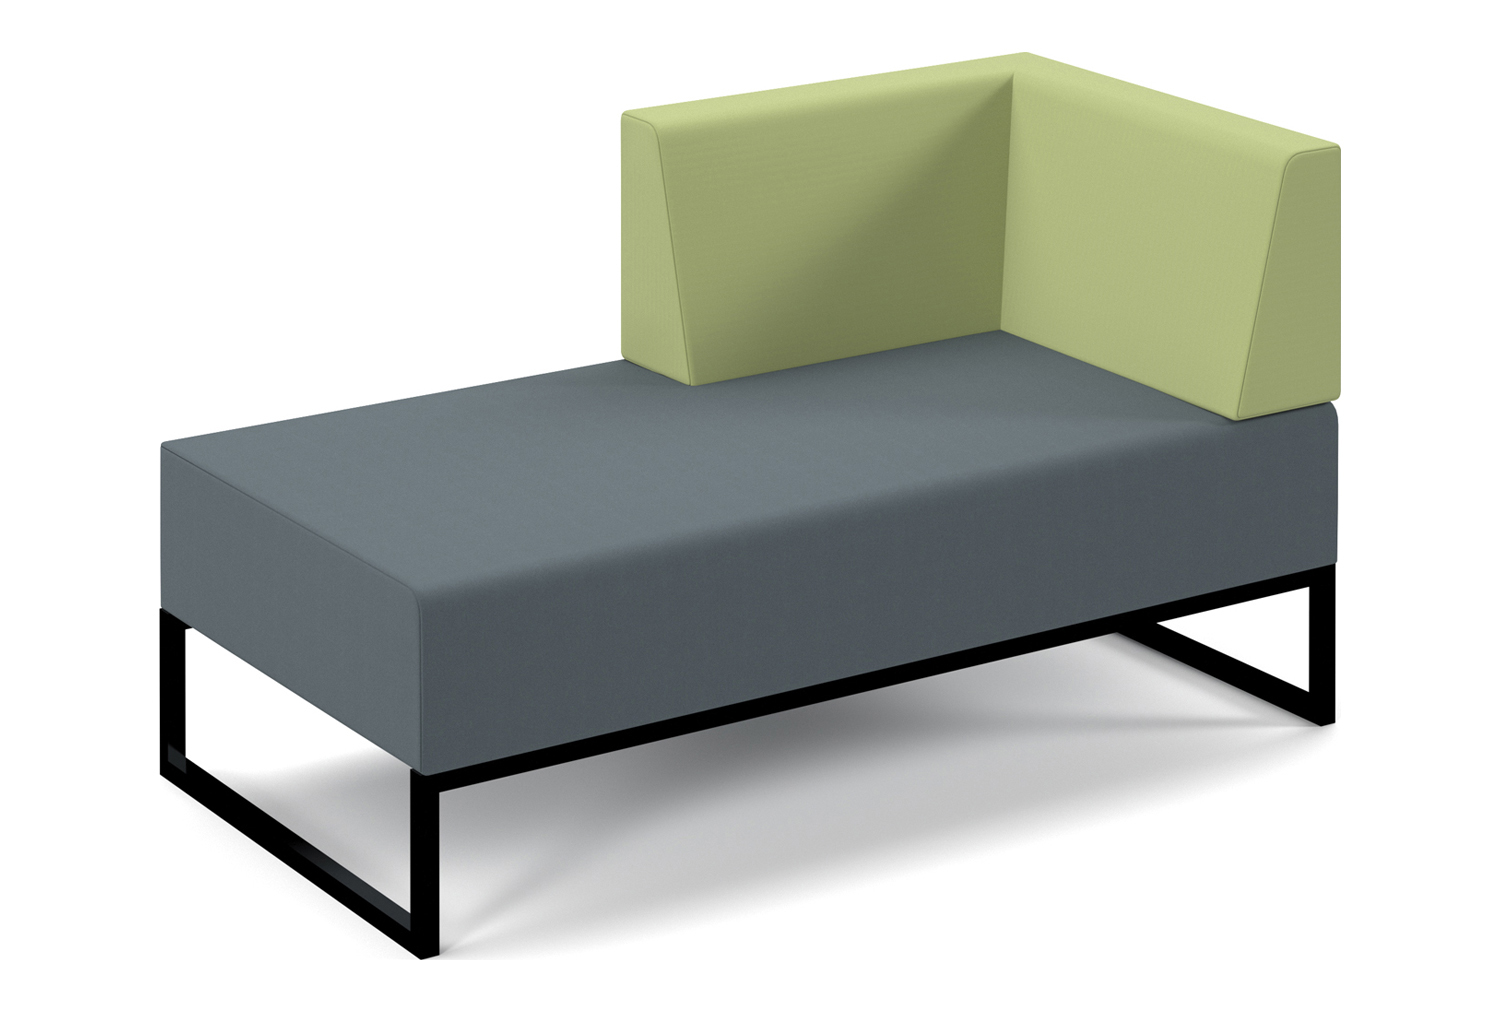 Fuse 2 Tone Double Bench With Left Arm And Back, Elapse Grey Seat/Endurance Back, Fully Installed